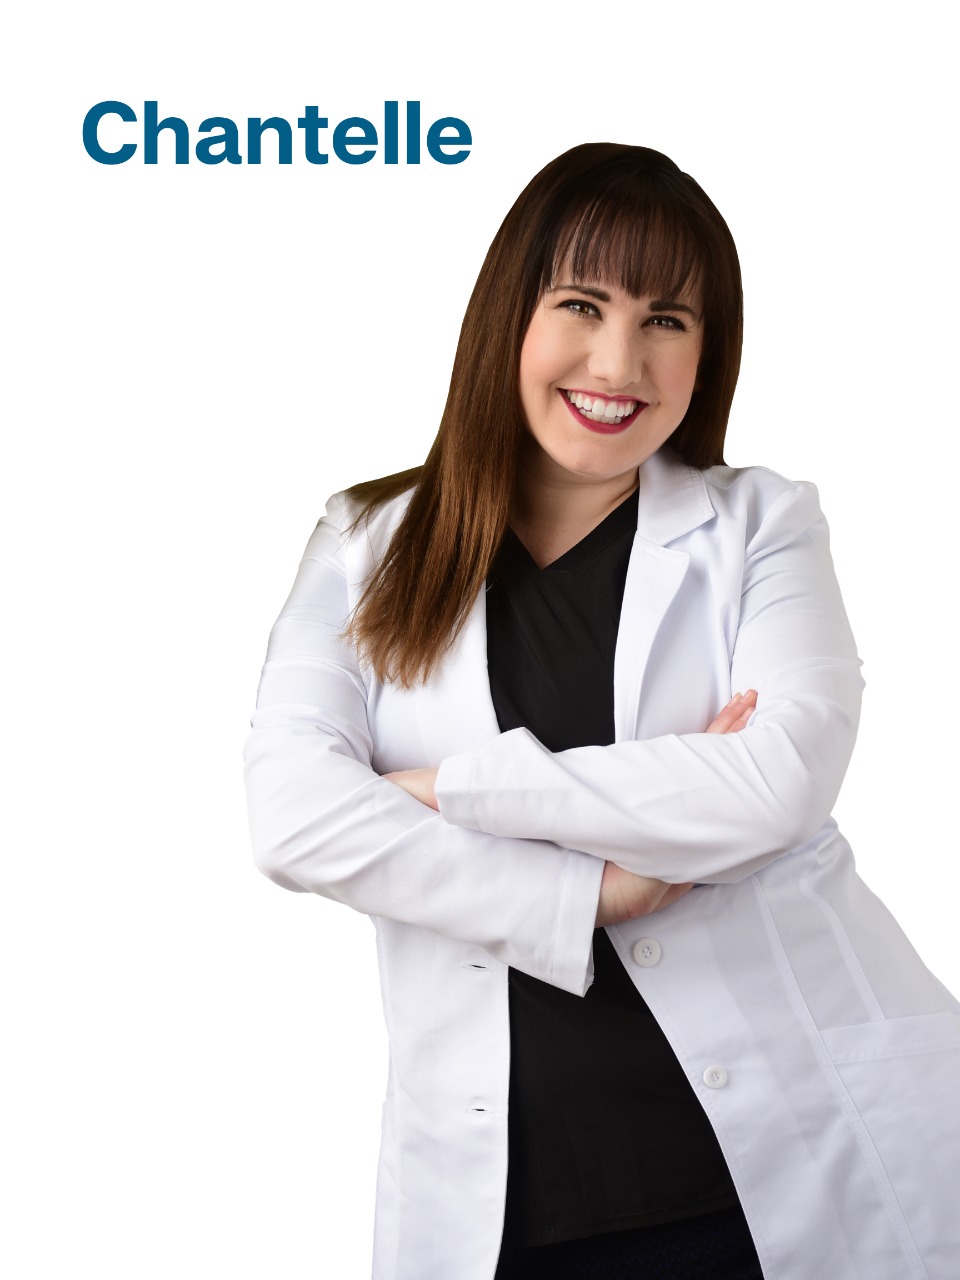 Chantelle Emery - Owner of Swift Hearing Centers